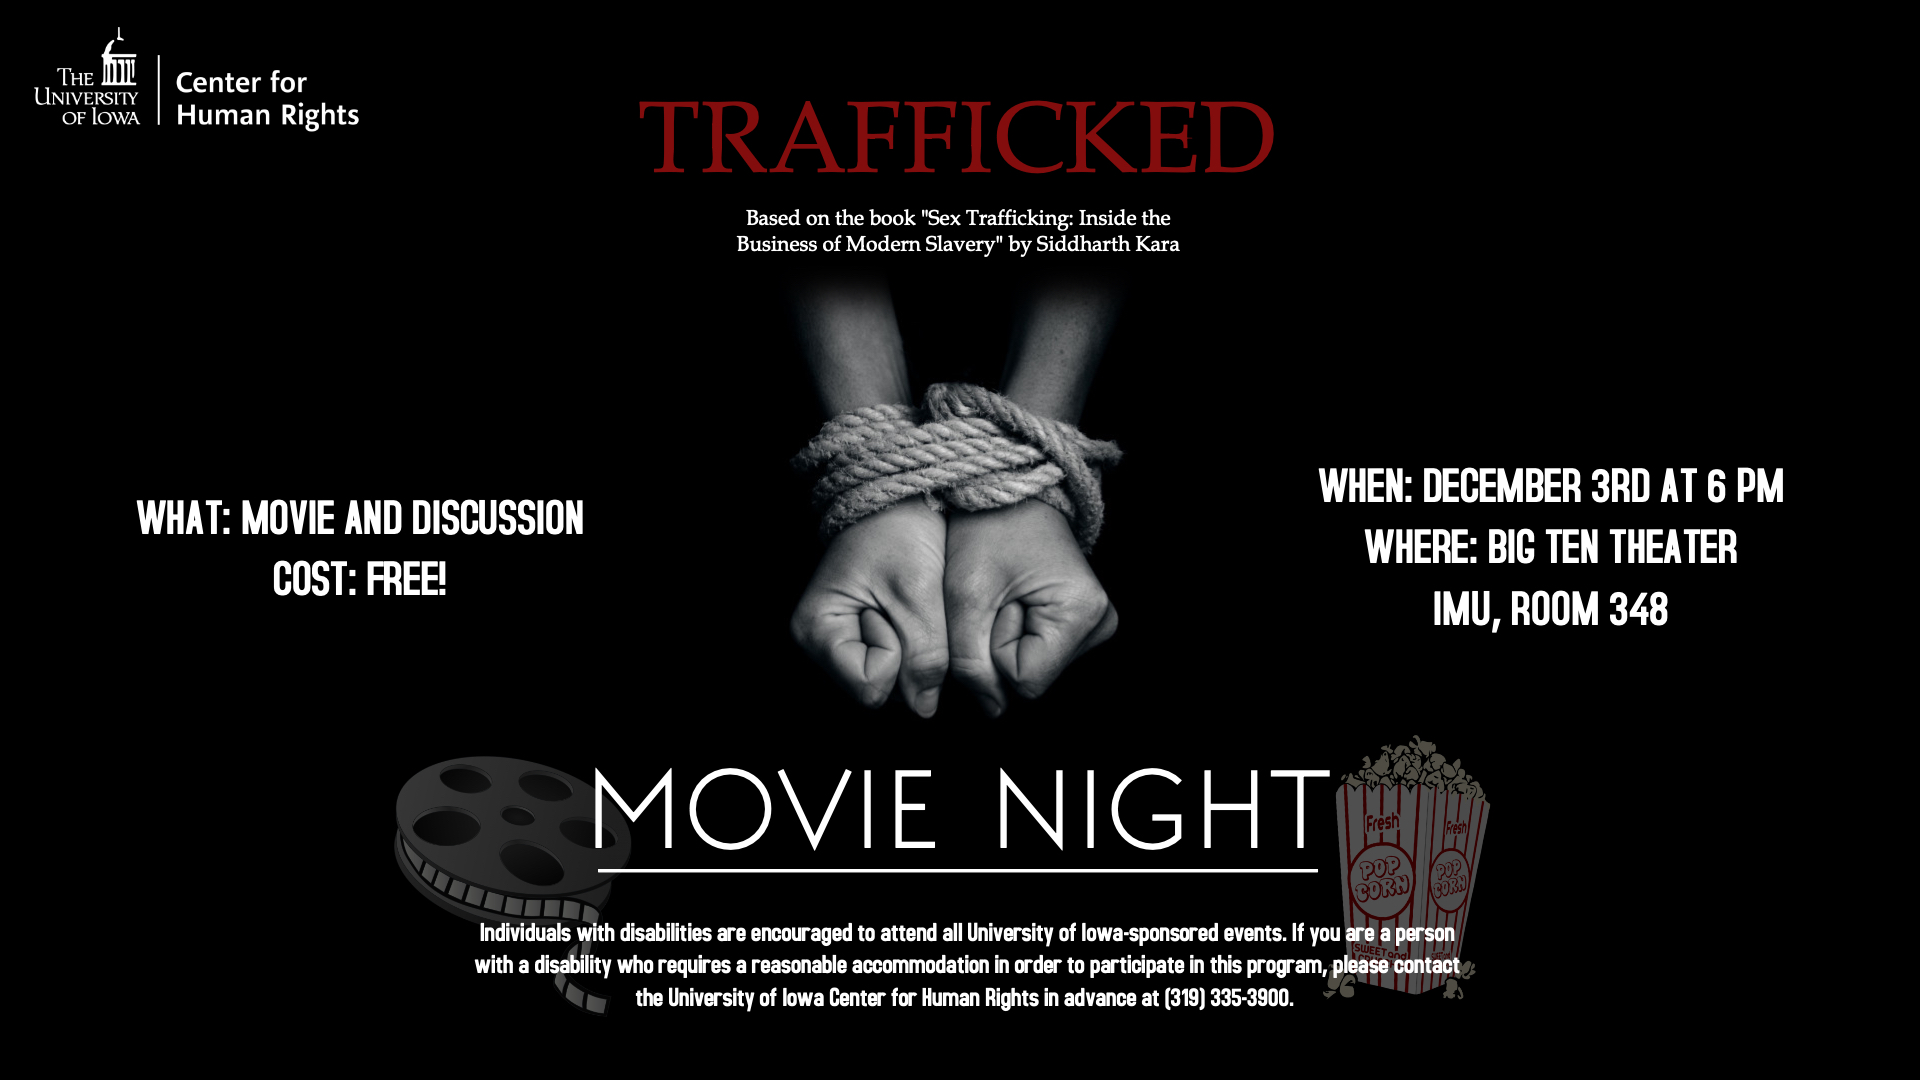 Trafficked. Basedo n the book "Sex Trafficking: Inside the Business of Modern Slavery" by Siddharth Kara. What: Movie and Discussion. Cost: Free! When: December 3rd at 6:00pm. Where: Big Ten Theater IMU, Room 348.